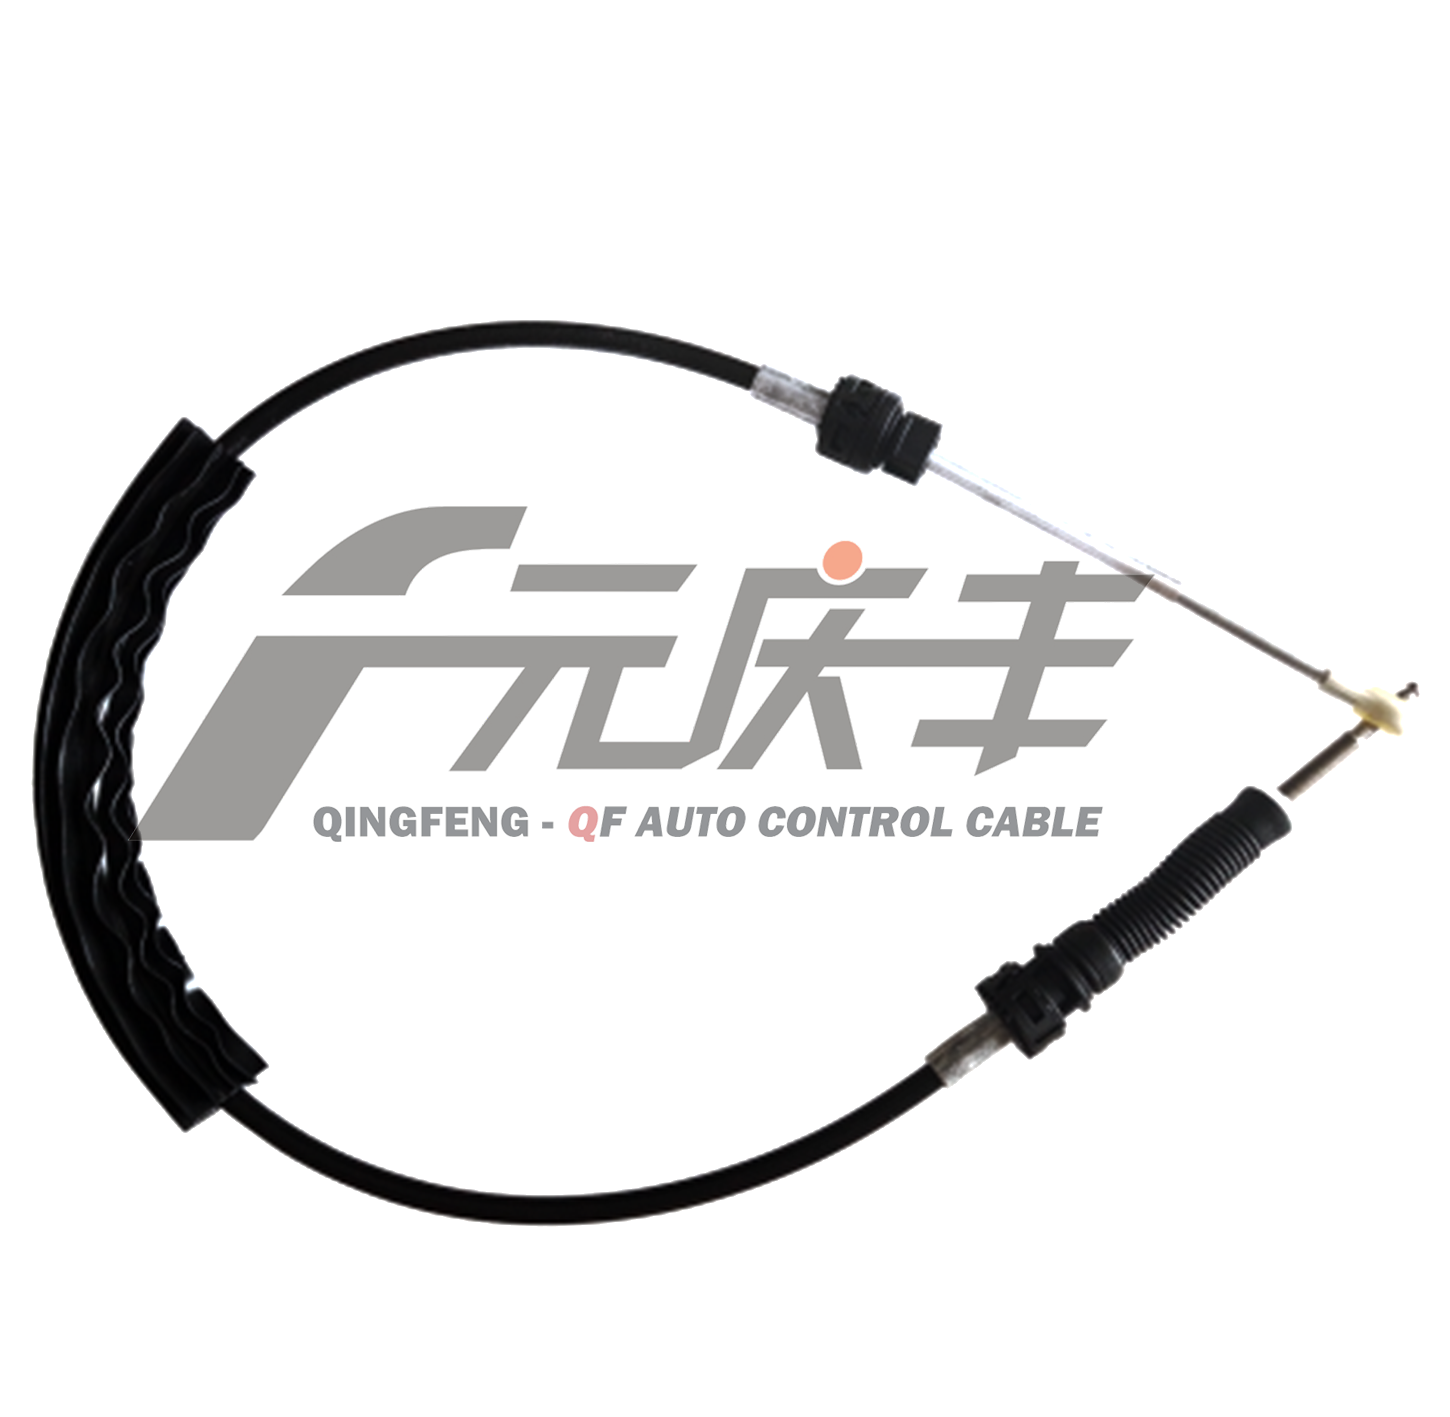 6Q0 711 266K gear shift cable transmission cable for Polo